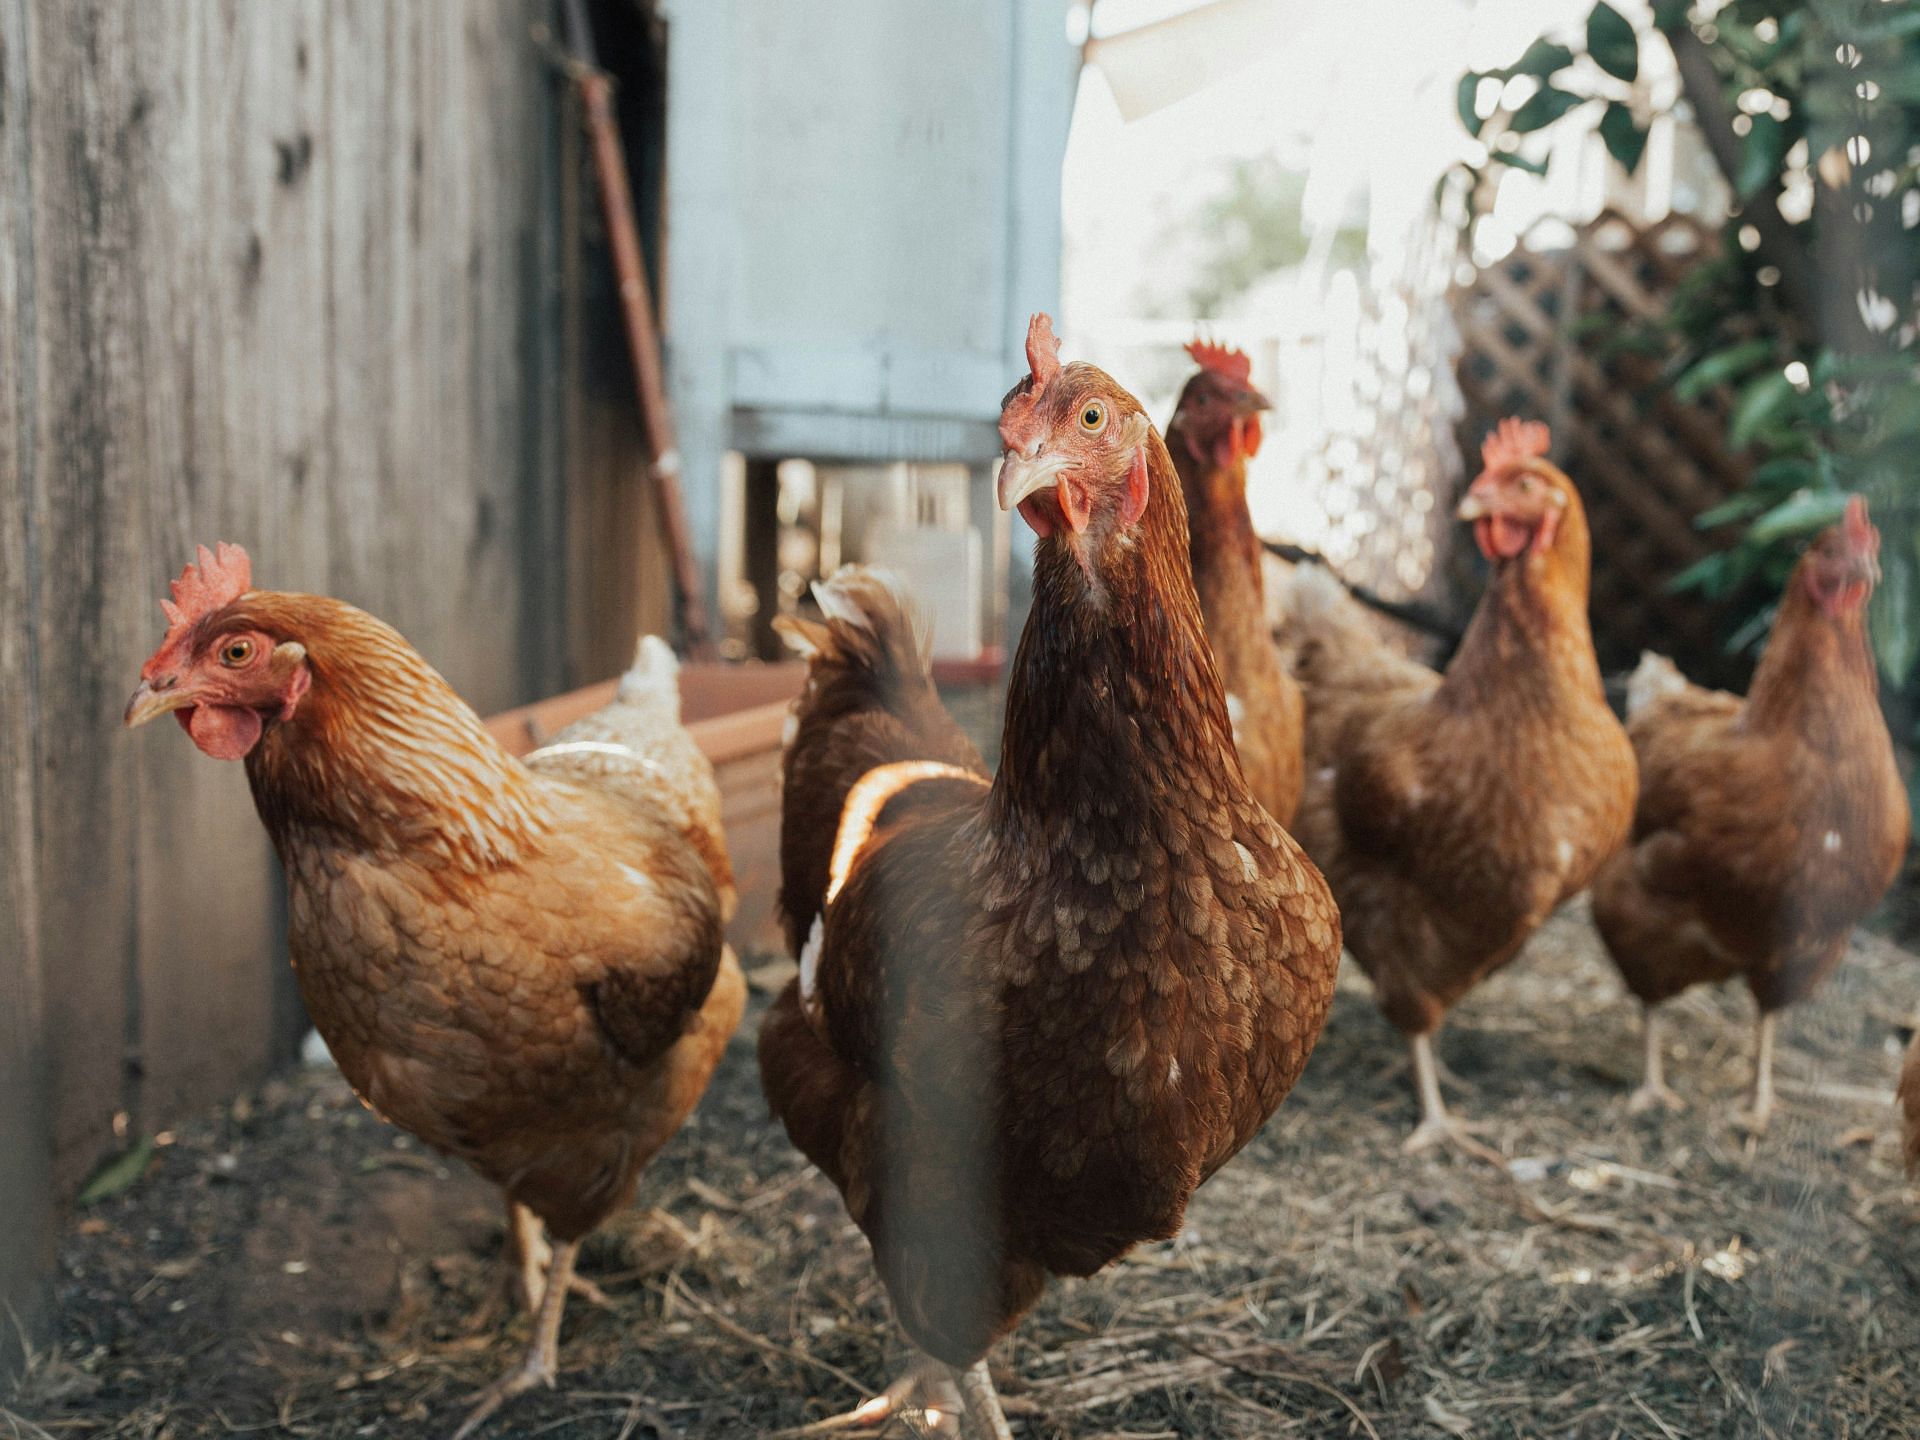 Chicken as a source of lean protein in Polycythemia Vera diet (Image by Ben Moreland/Unsplash)